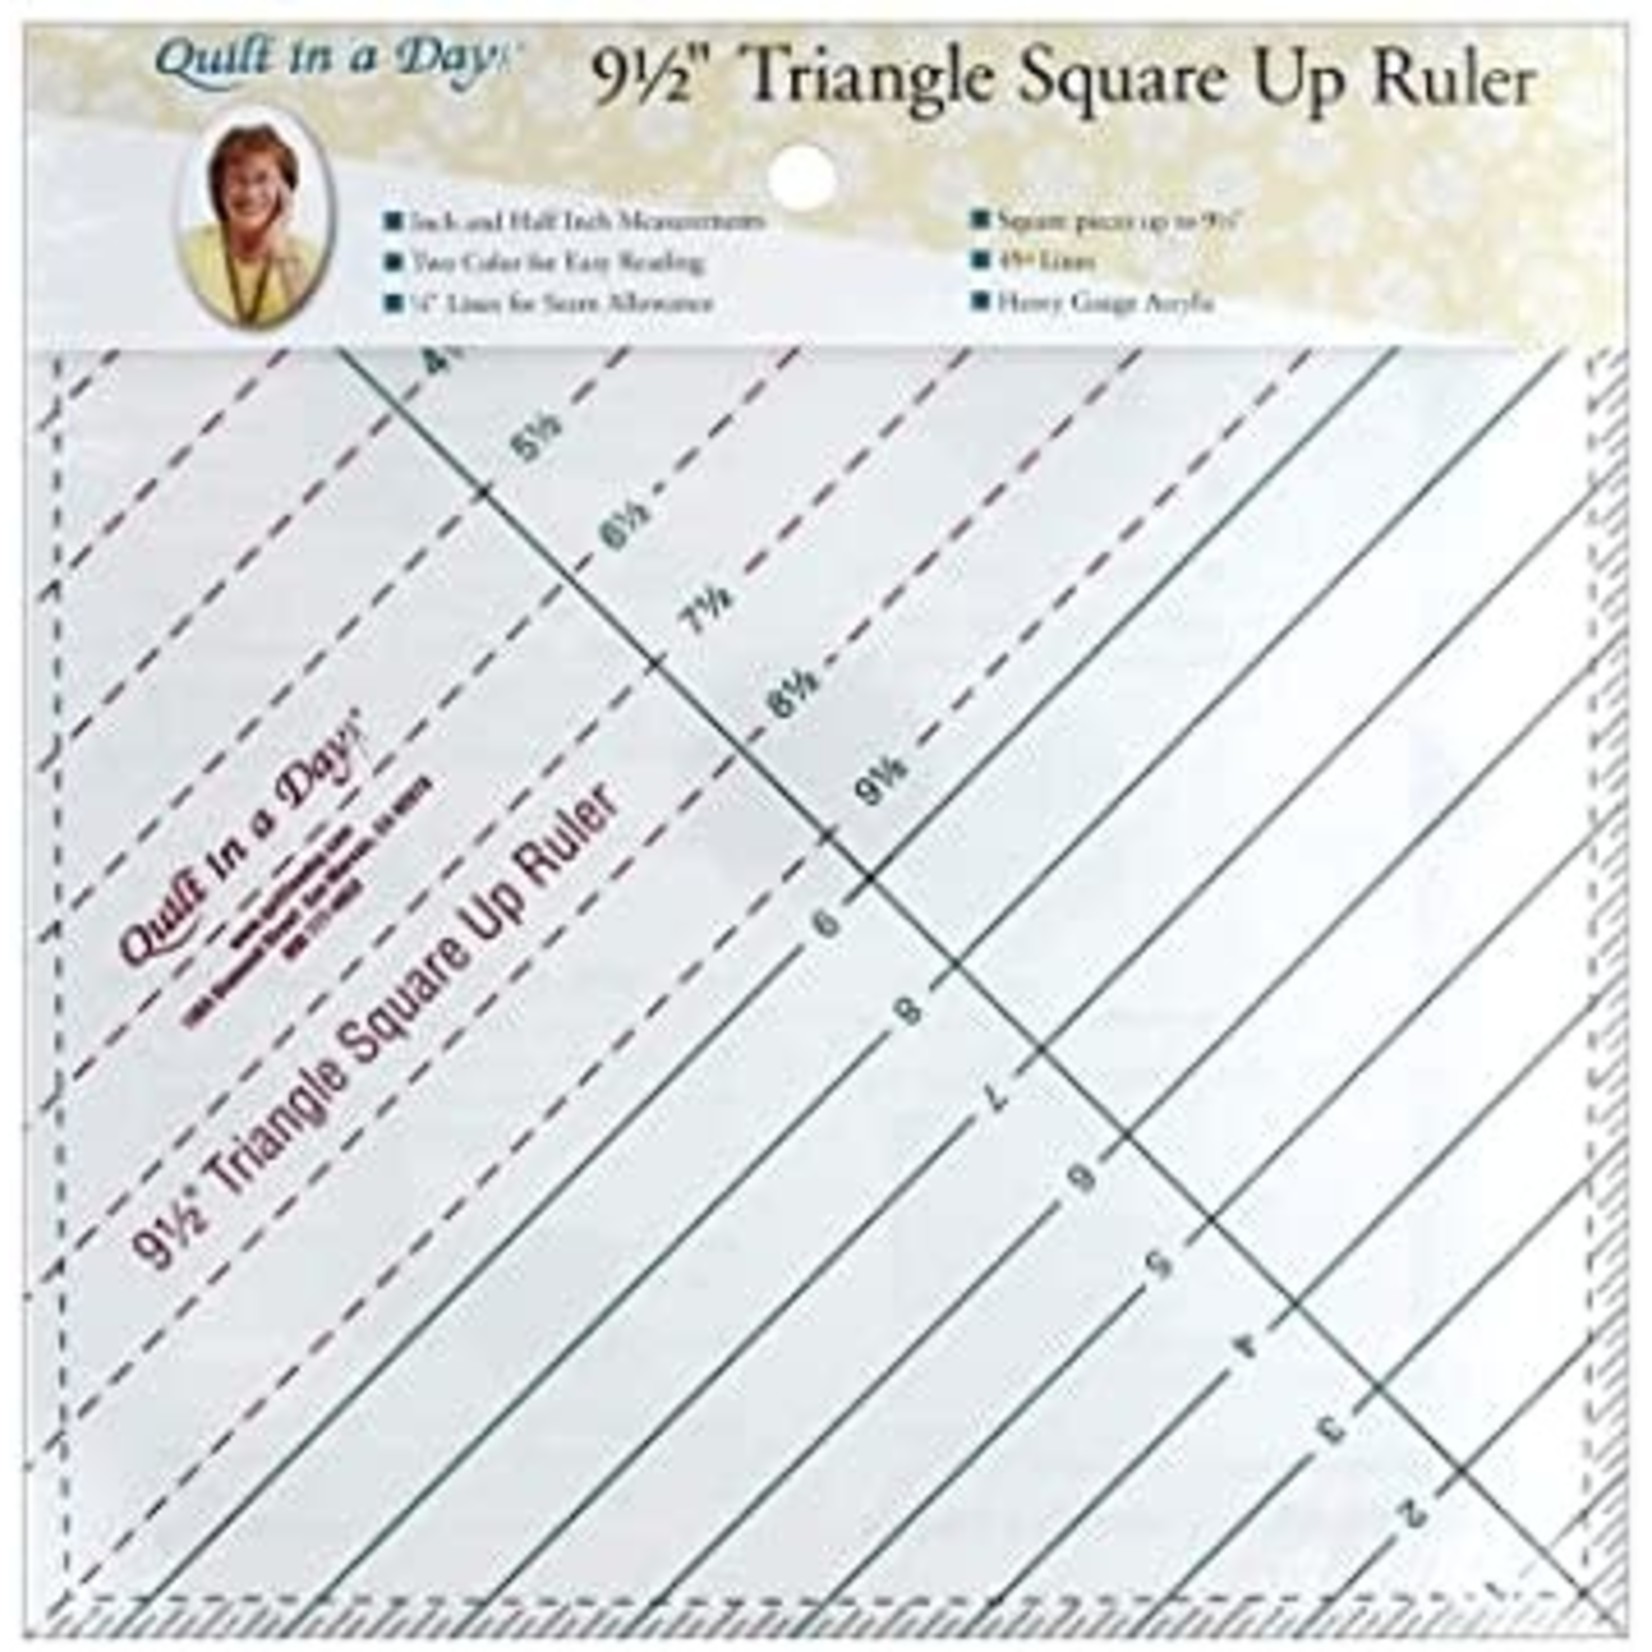 9 1/2” SQUARE UP RULER